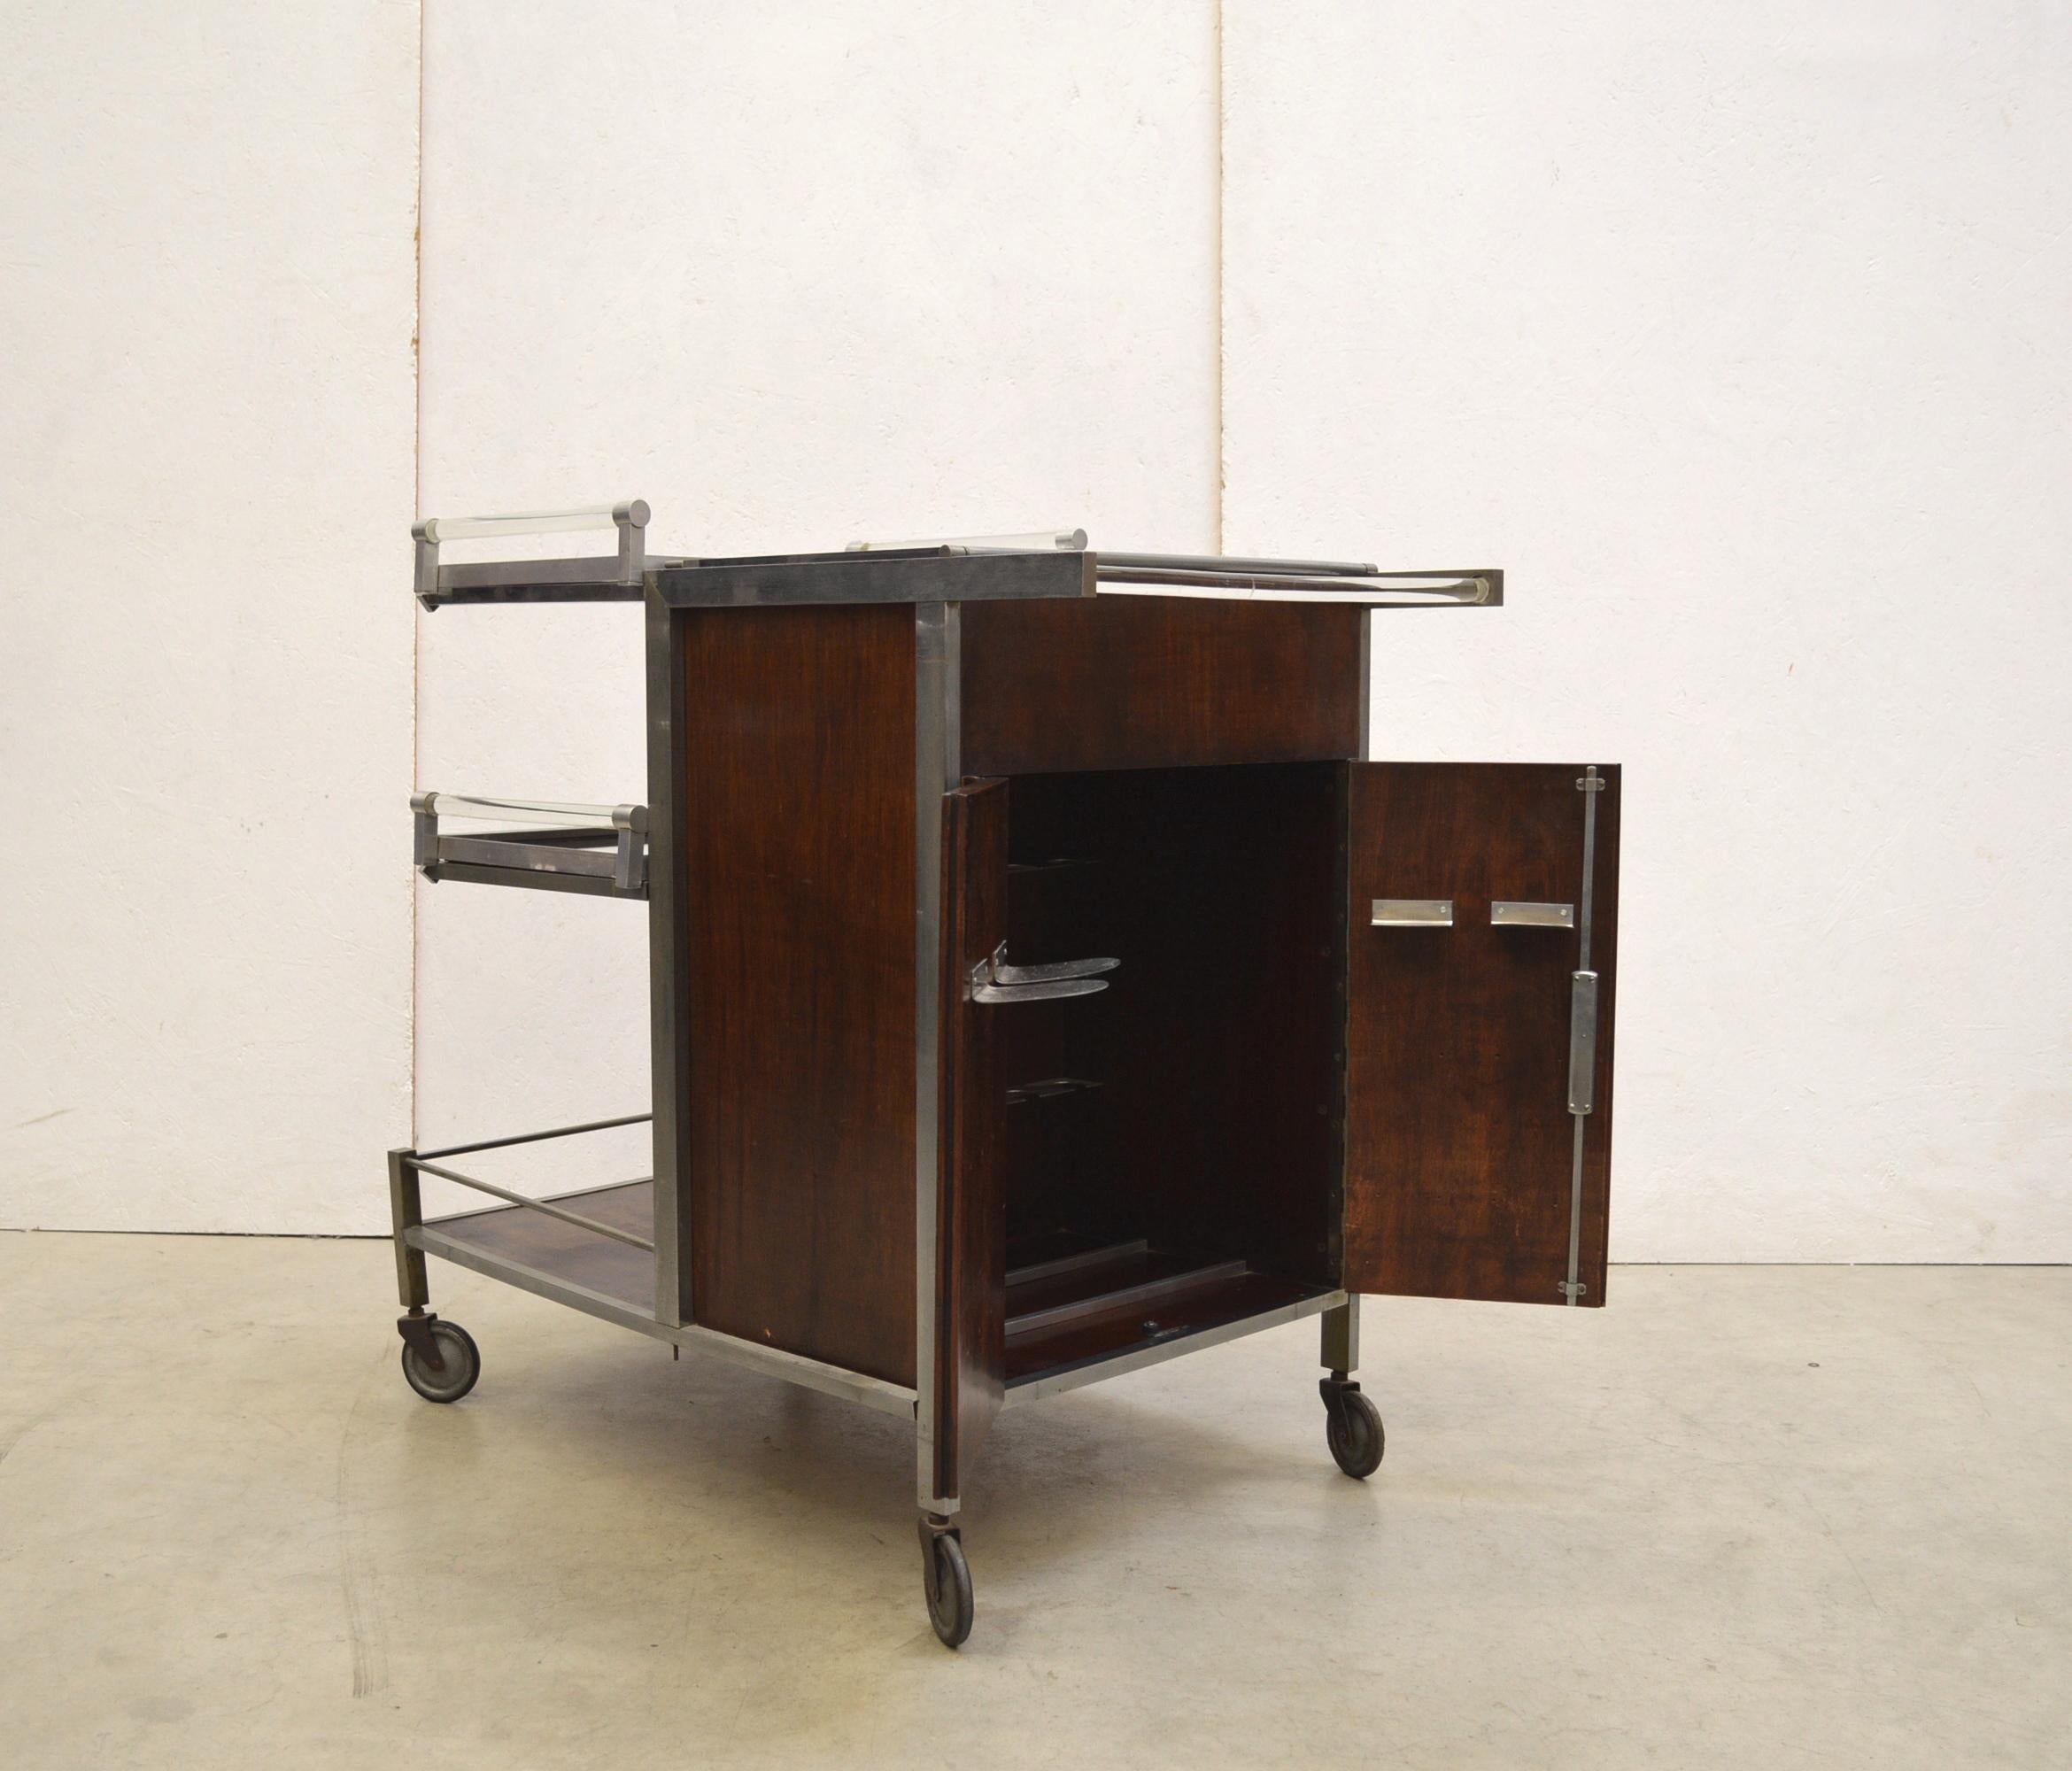 A wonderful bar cart trolley by Jacques Adnet ( France 1900 - 1984) made in the 1930s.
The bar card features chromed metal parts, aluminium and mahogany veneer structure.

Wonderful bar with 2 doors. Mirrored glass trays which are moveable.
Also